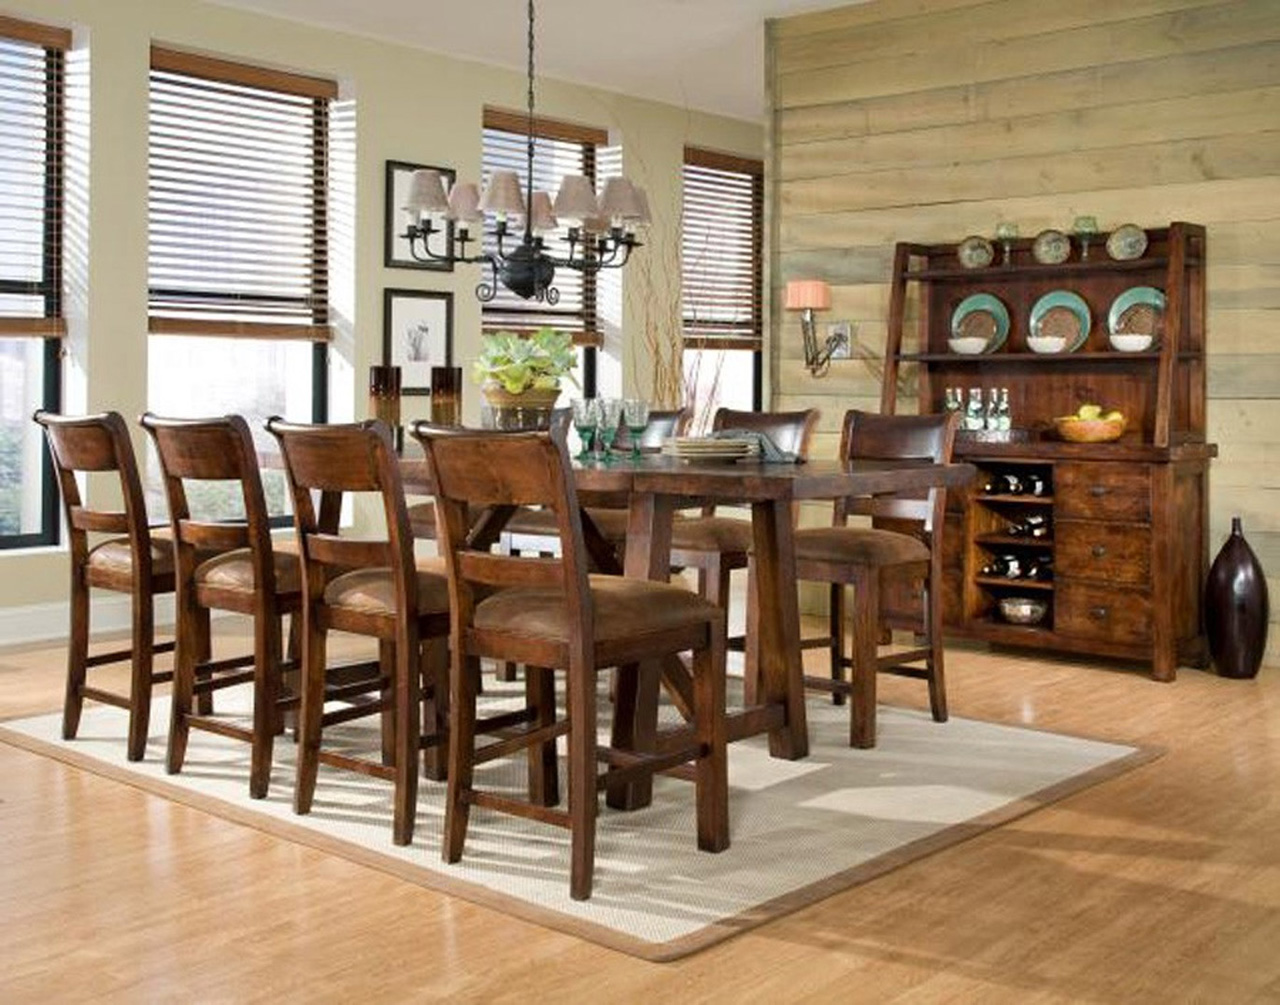 Woodlands Rectangular Room Rustic Woodlands Rectangular Trestle Dining Room Tables With Natural Brown Wood Chairs Dining Room Design Plans Also Simple Glass Tableware Design Ideas Dining Room Choosing The Right Dining Room Tables